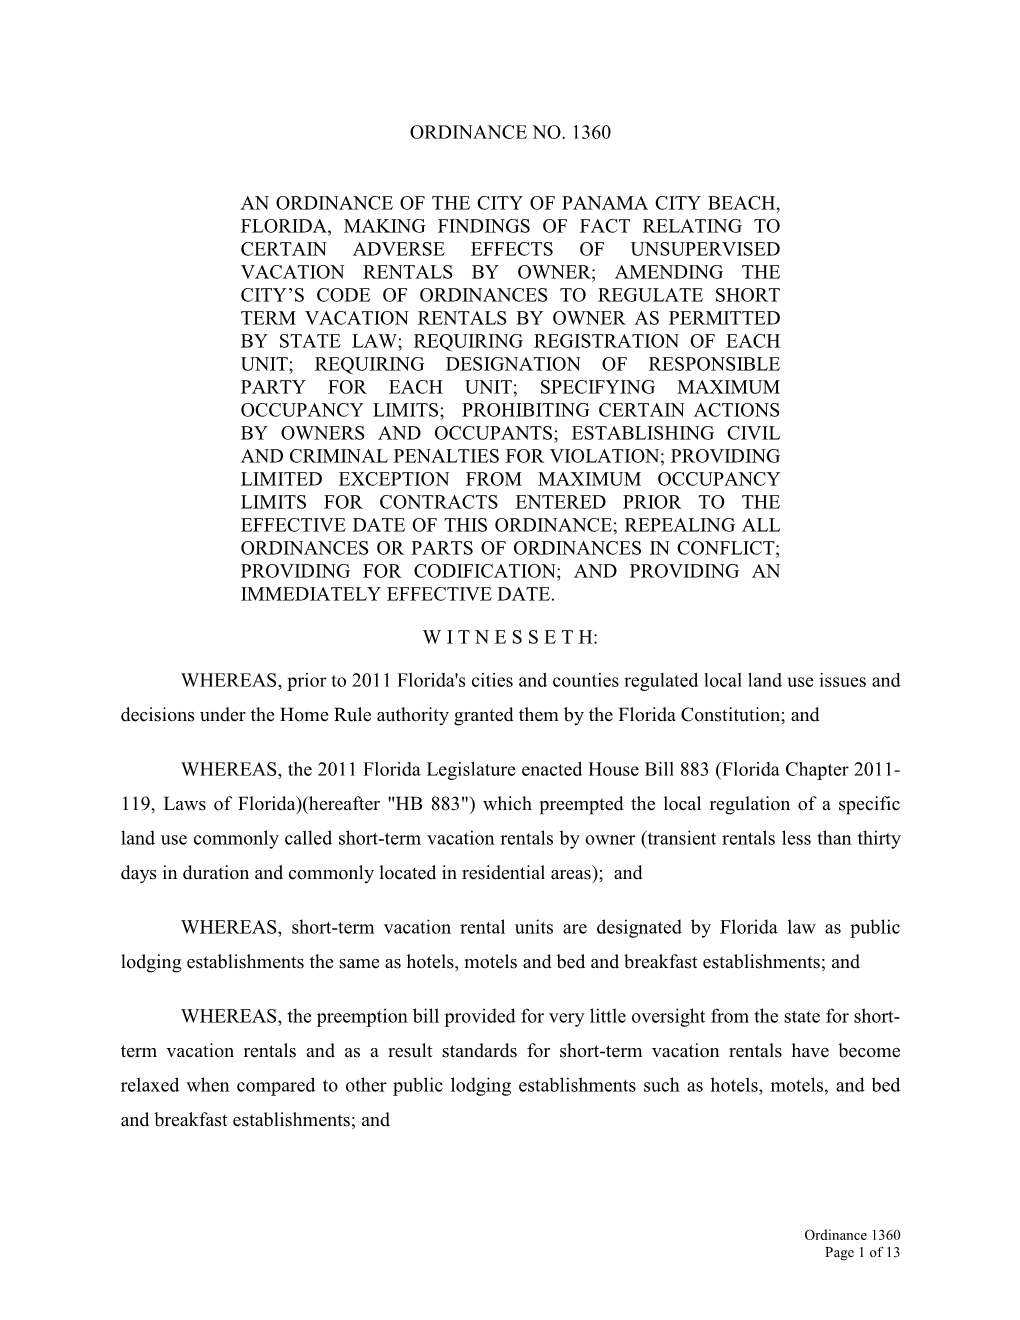 Ordinance No. 1360 an Ordinance of the City of Panama City Beach, Florida, Making Findings of Fact Relating to Certain Adverse